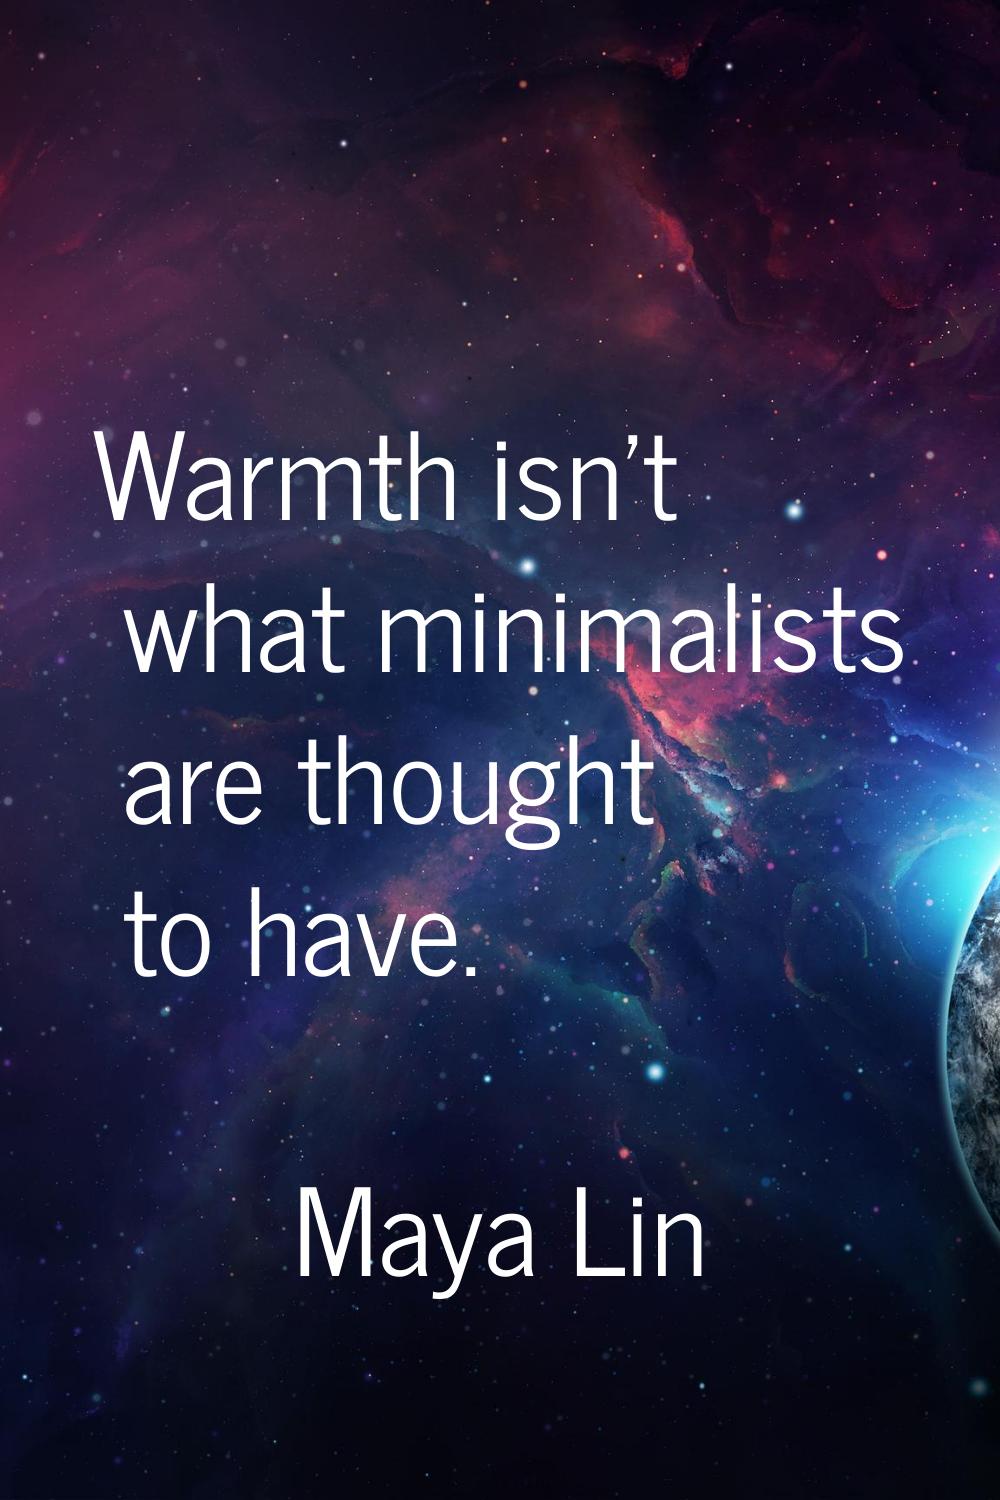 Warmth isn't what minimalists are thought to have.